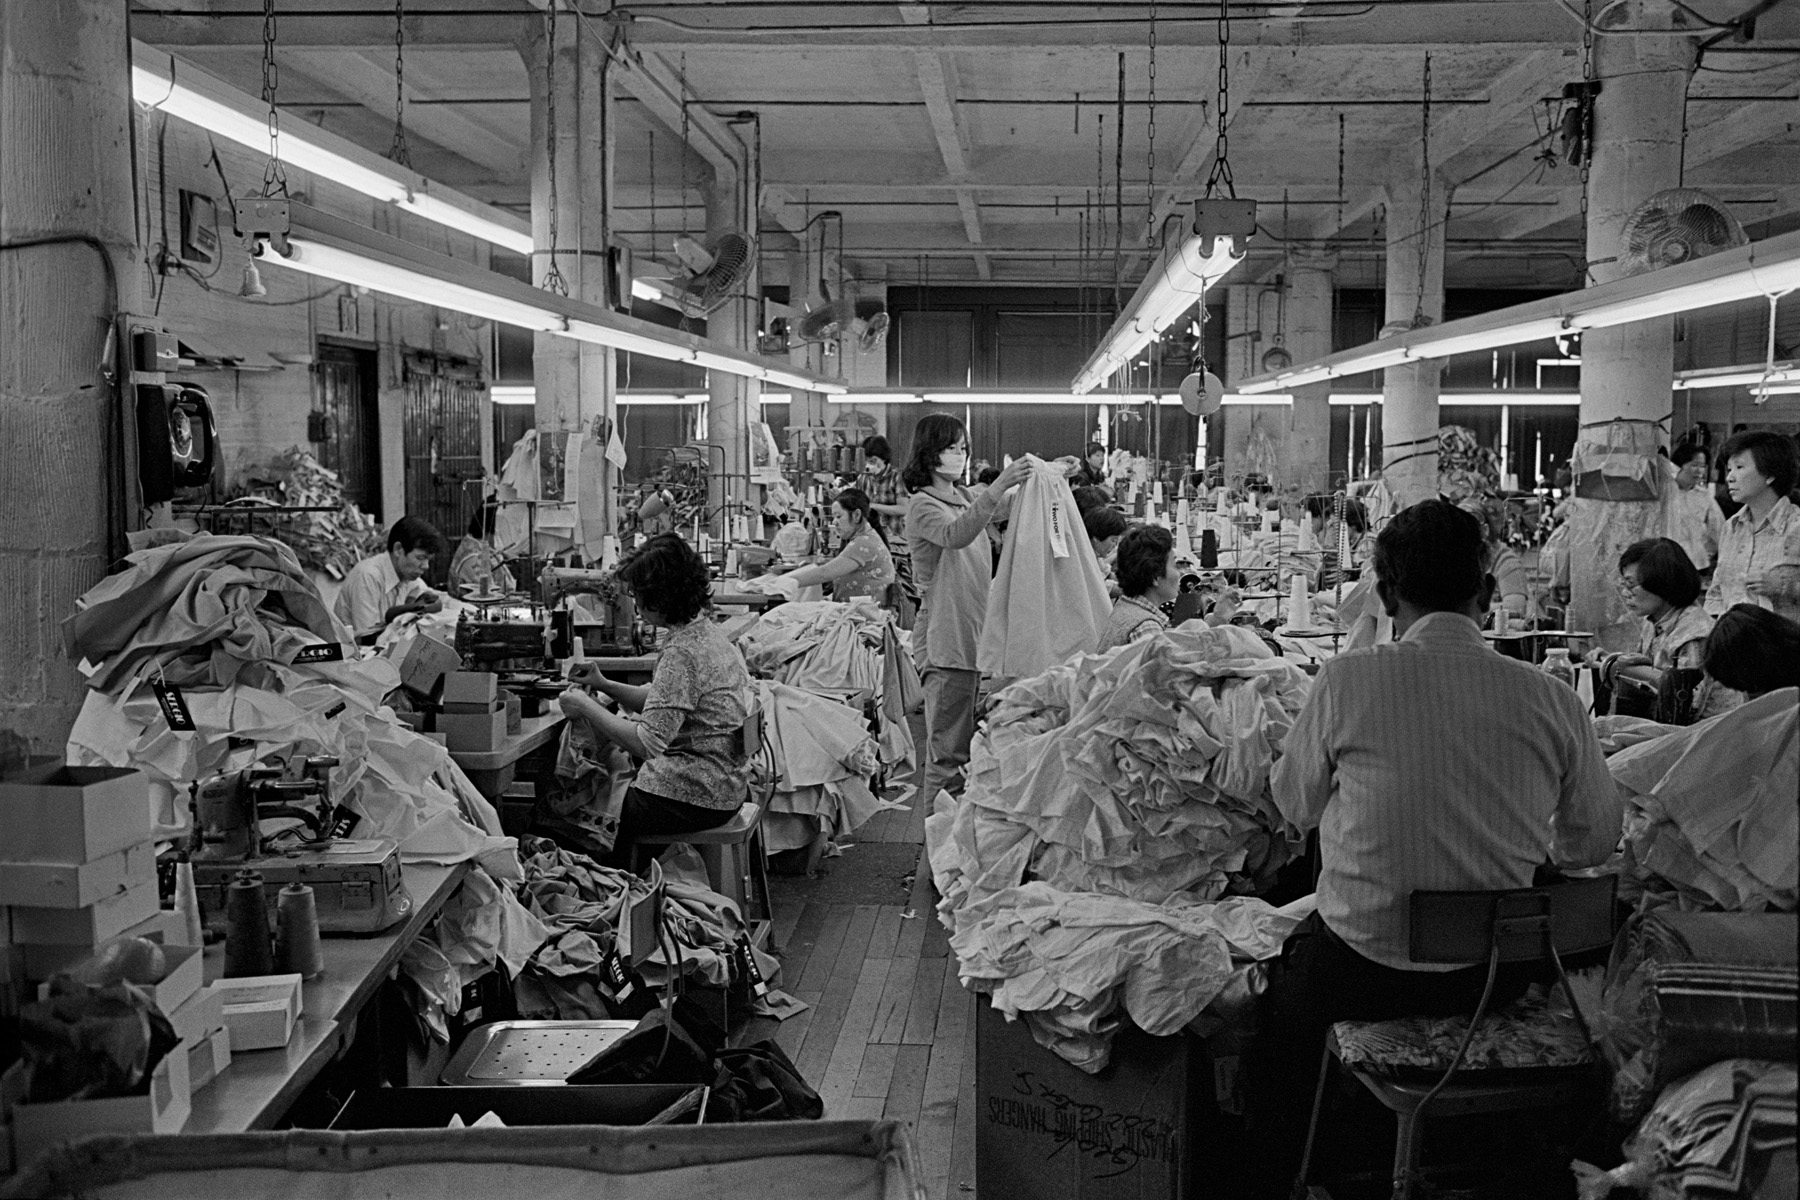 A view of Geolan Sportswear a Garment factory, 202 Centre St. New York Chinatown, 1983. Numerous people are shown working in the factory that is lit with flourescent lights. 